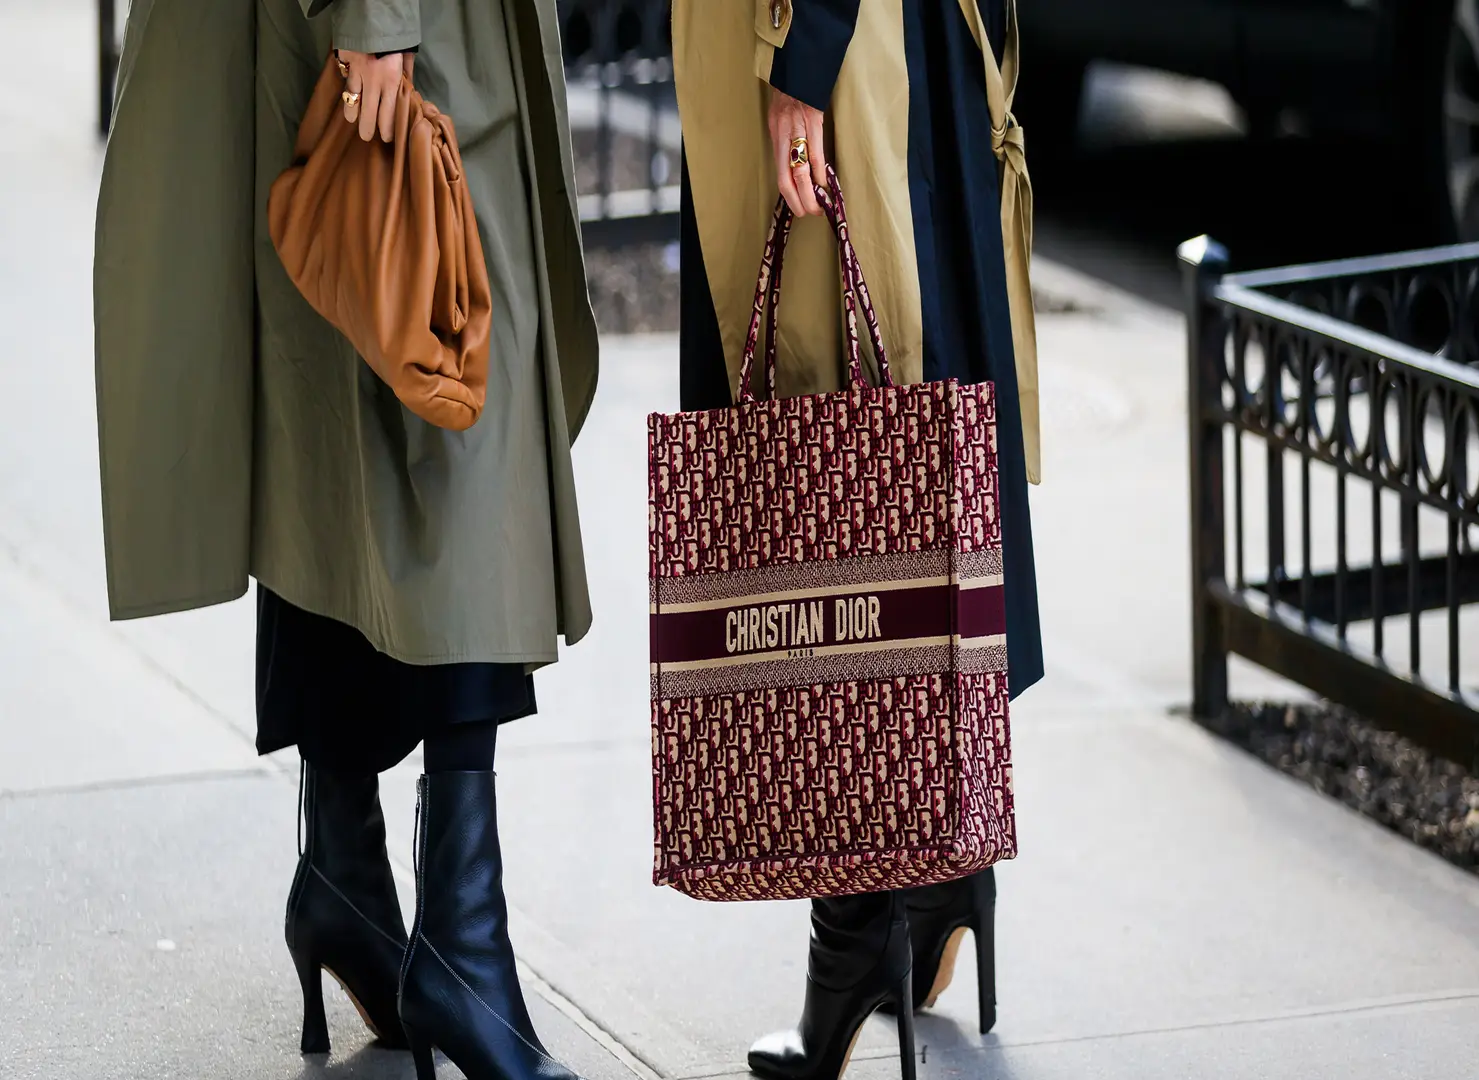 women-discussing-with-christian-dior-monogram-book-tote-bag-and-brown-bag-street-style.jpg